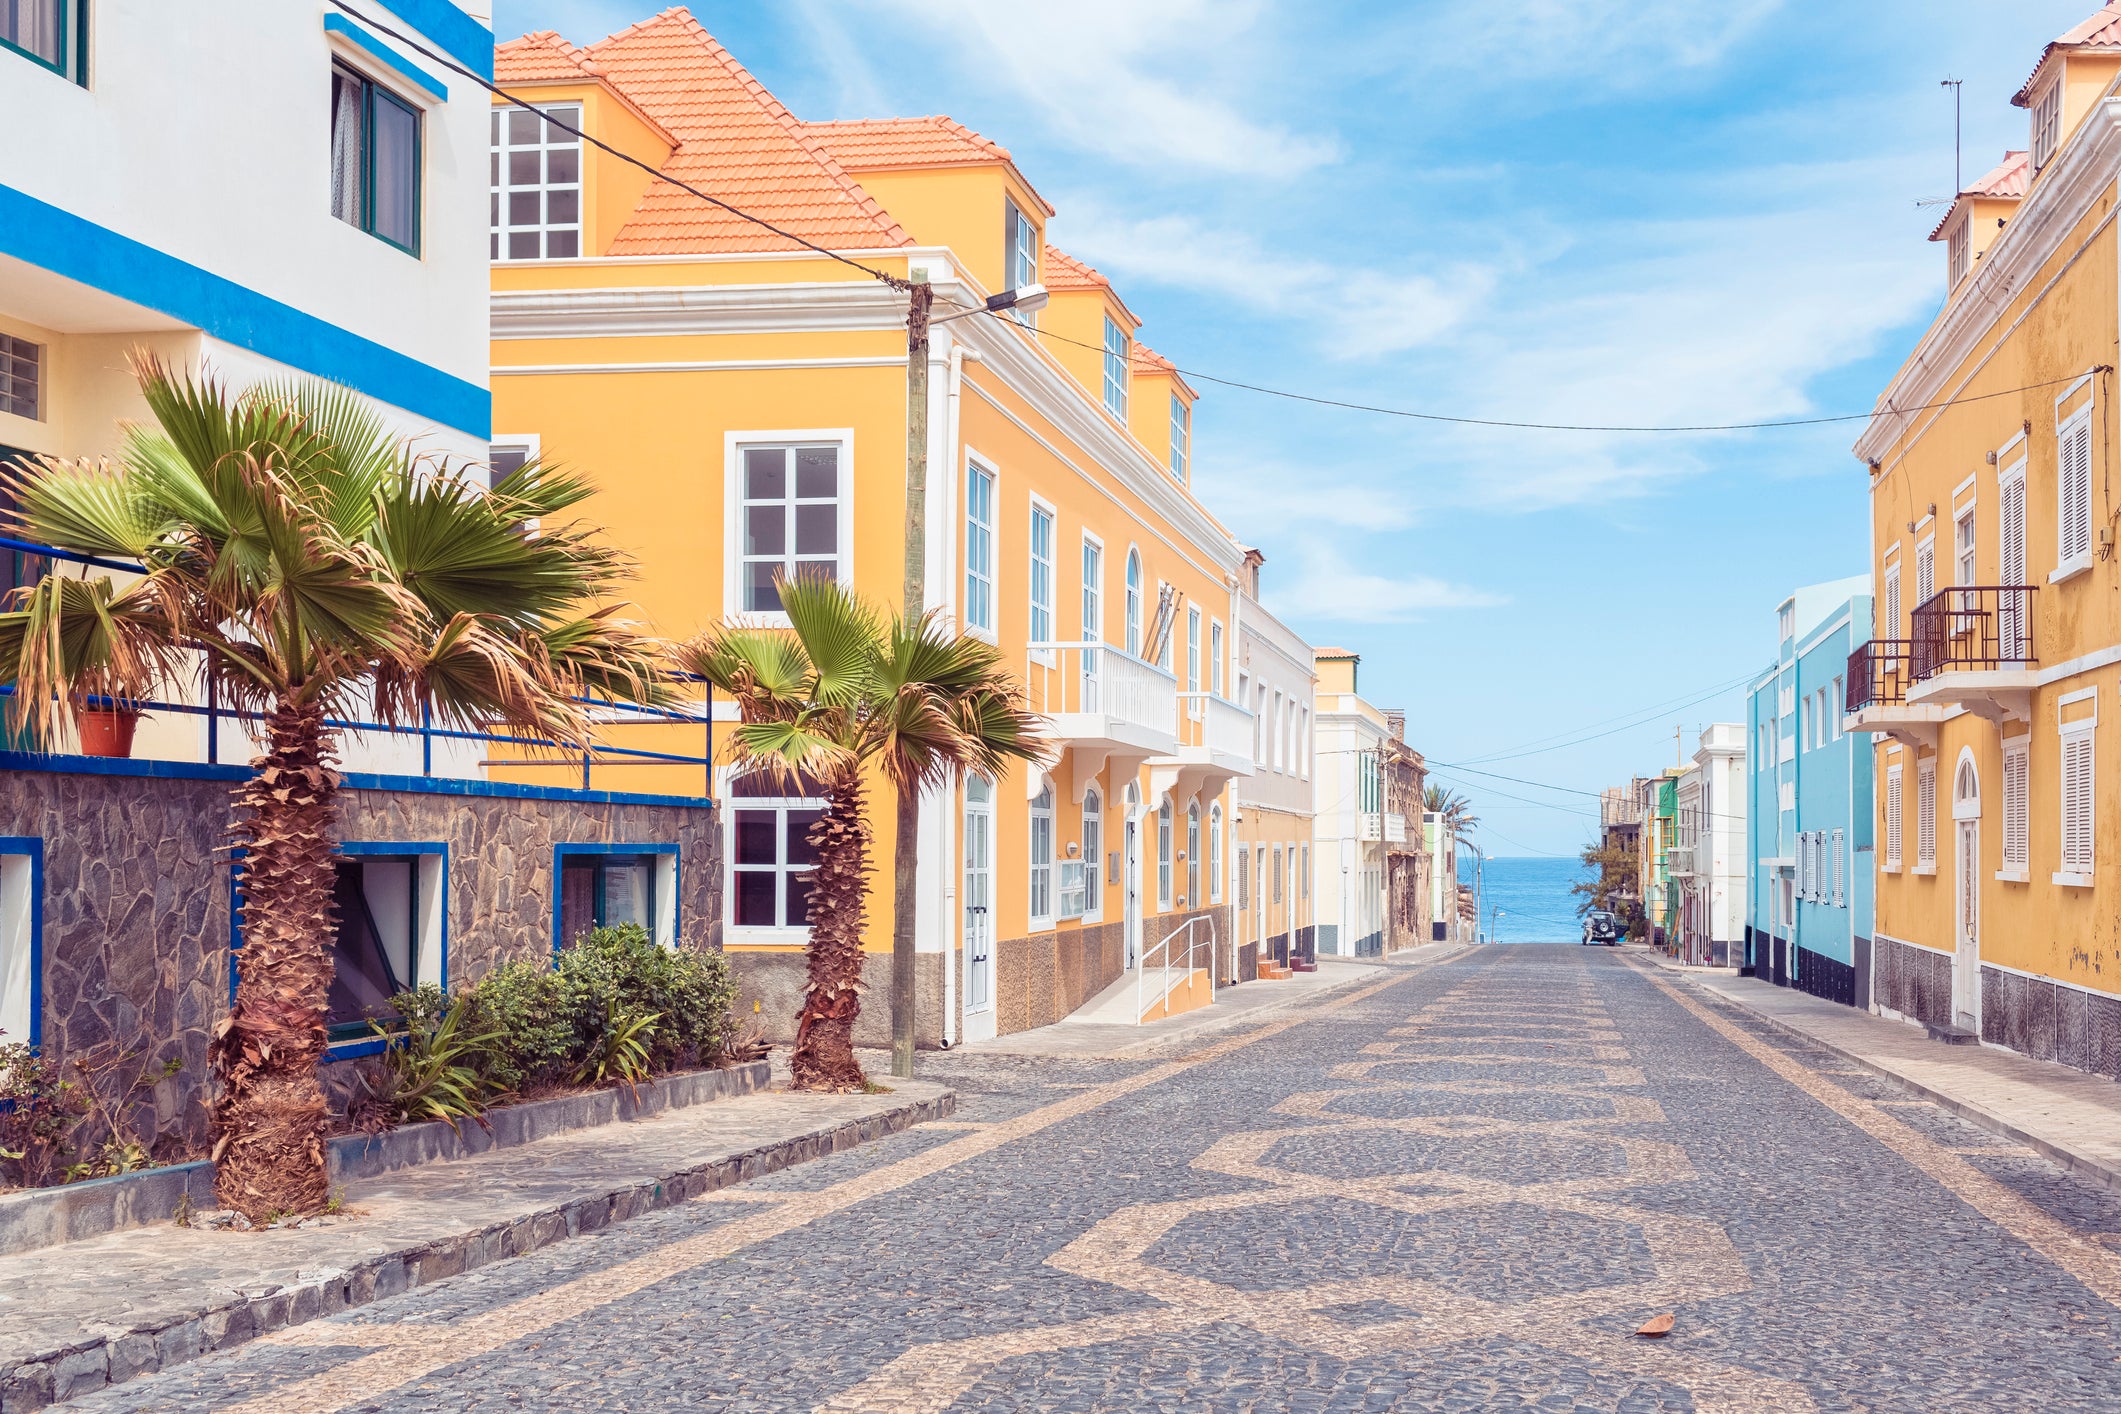 The pastel houses of Ponta do Sol, the northernmost city on Cape Verde island